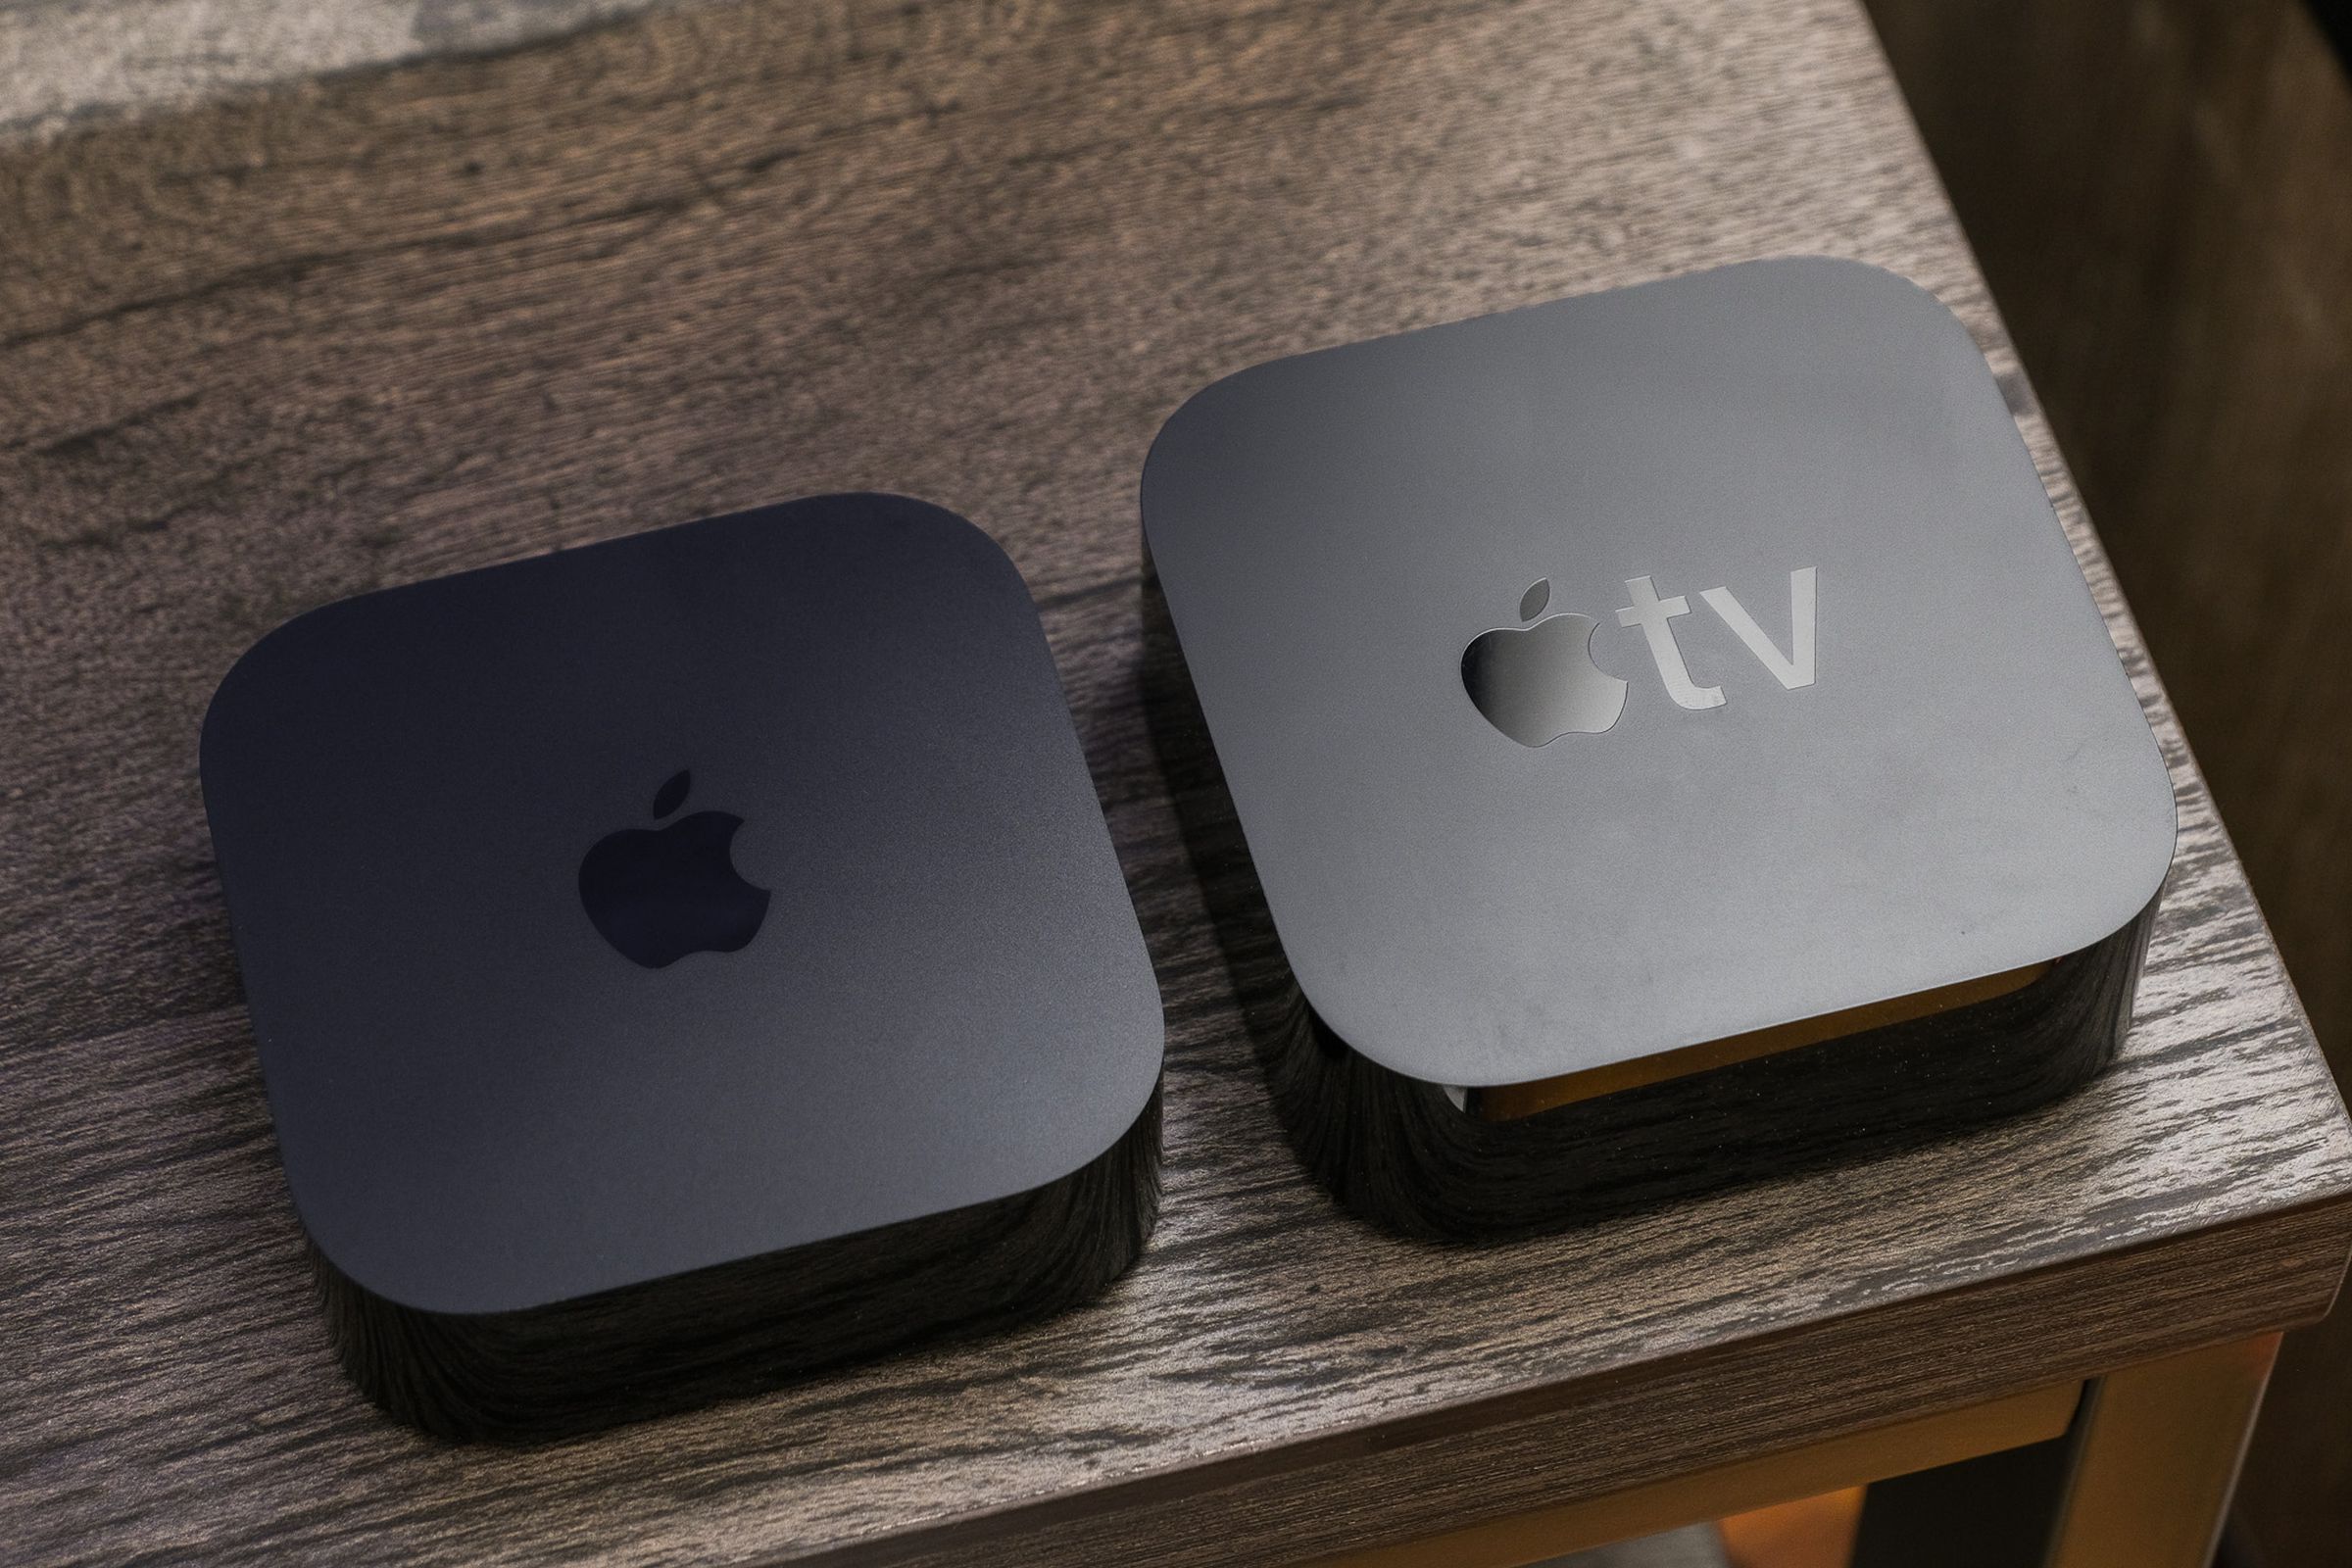 A comparison photo of the third-generation Apple TV 4K beside the second-generation Apple TV 4K.